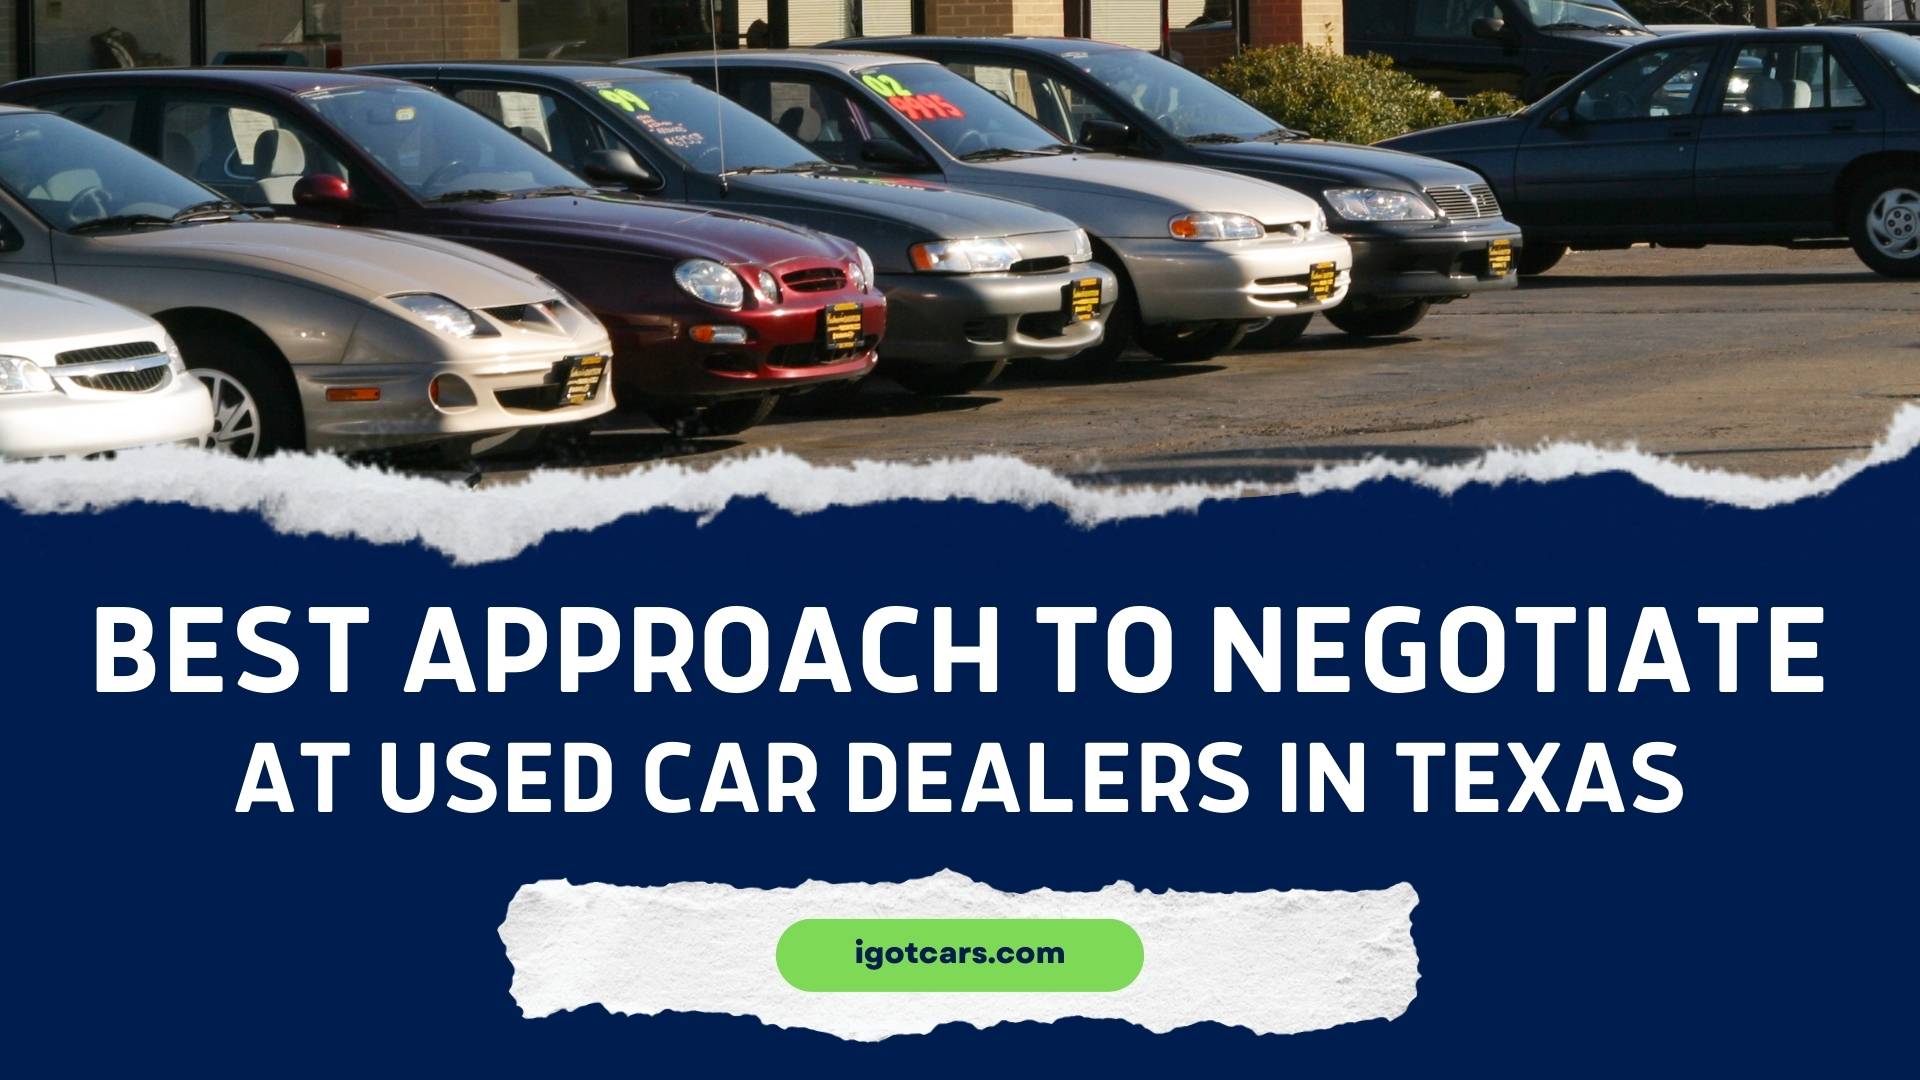 Best Approach To Negotiate At Used Car Dealers In Texas